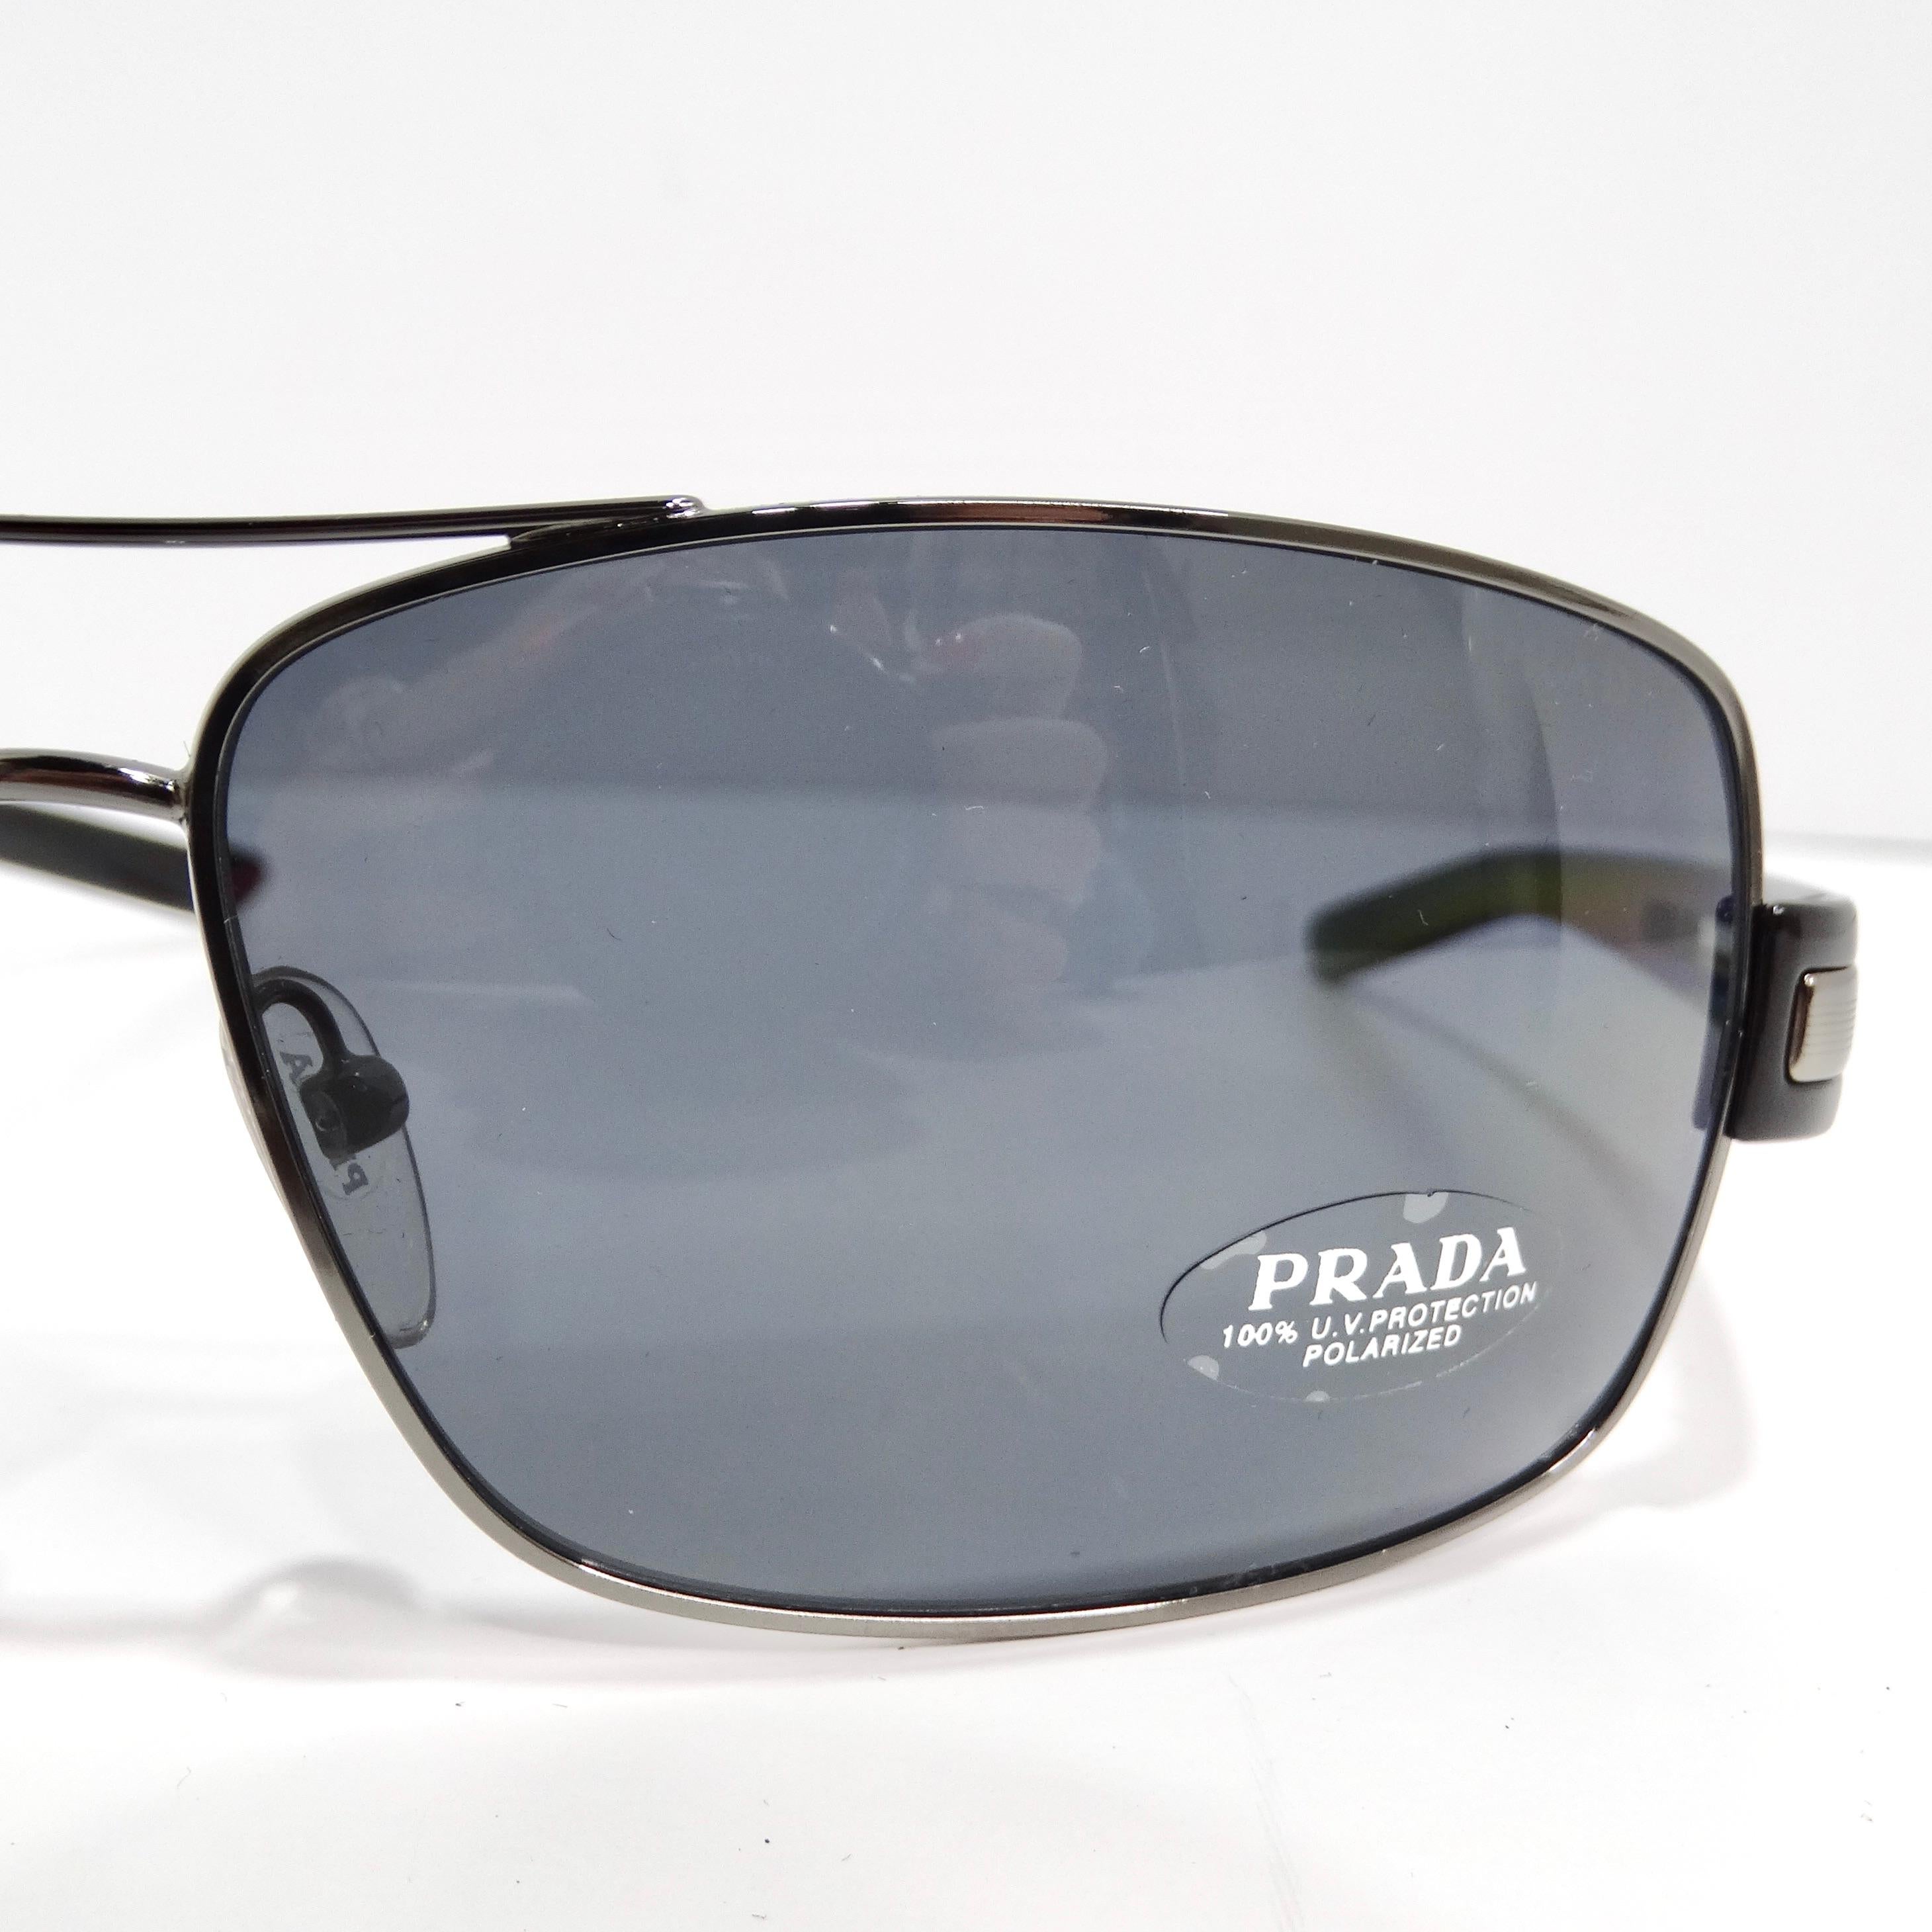 Step into timeless sophistication with the Prada 1990s Black Silver Tone Aviator Sunglasses, a classic aviator style that effortlessly combines elegance with enduring style. These sunglasses feature thin silver-tone rims, complemented by black arms